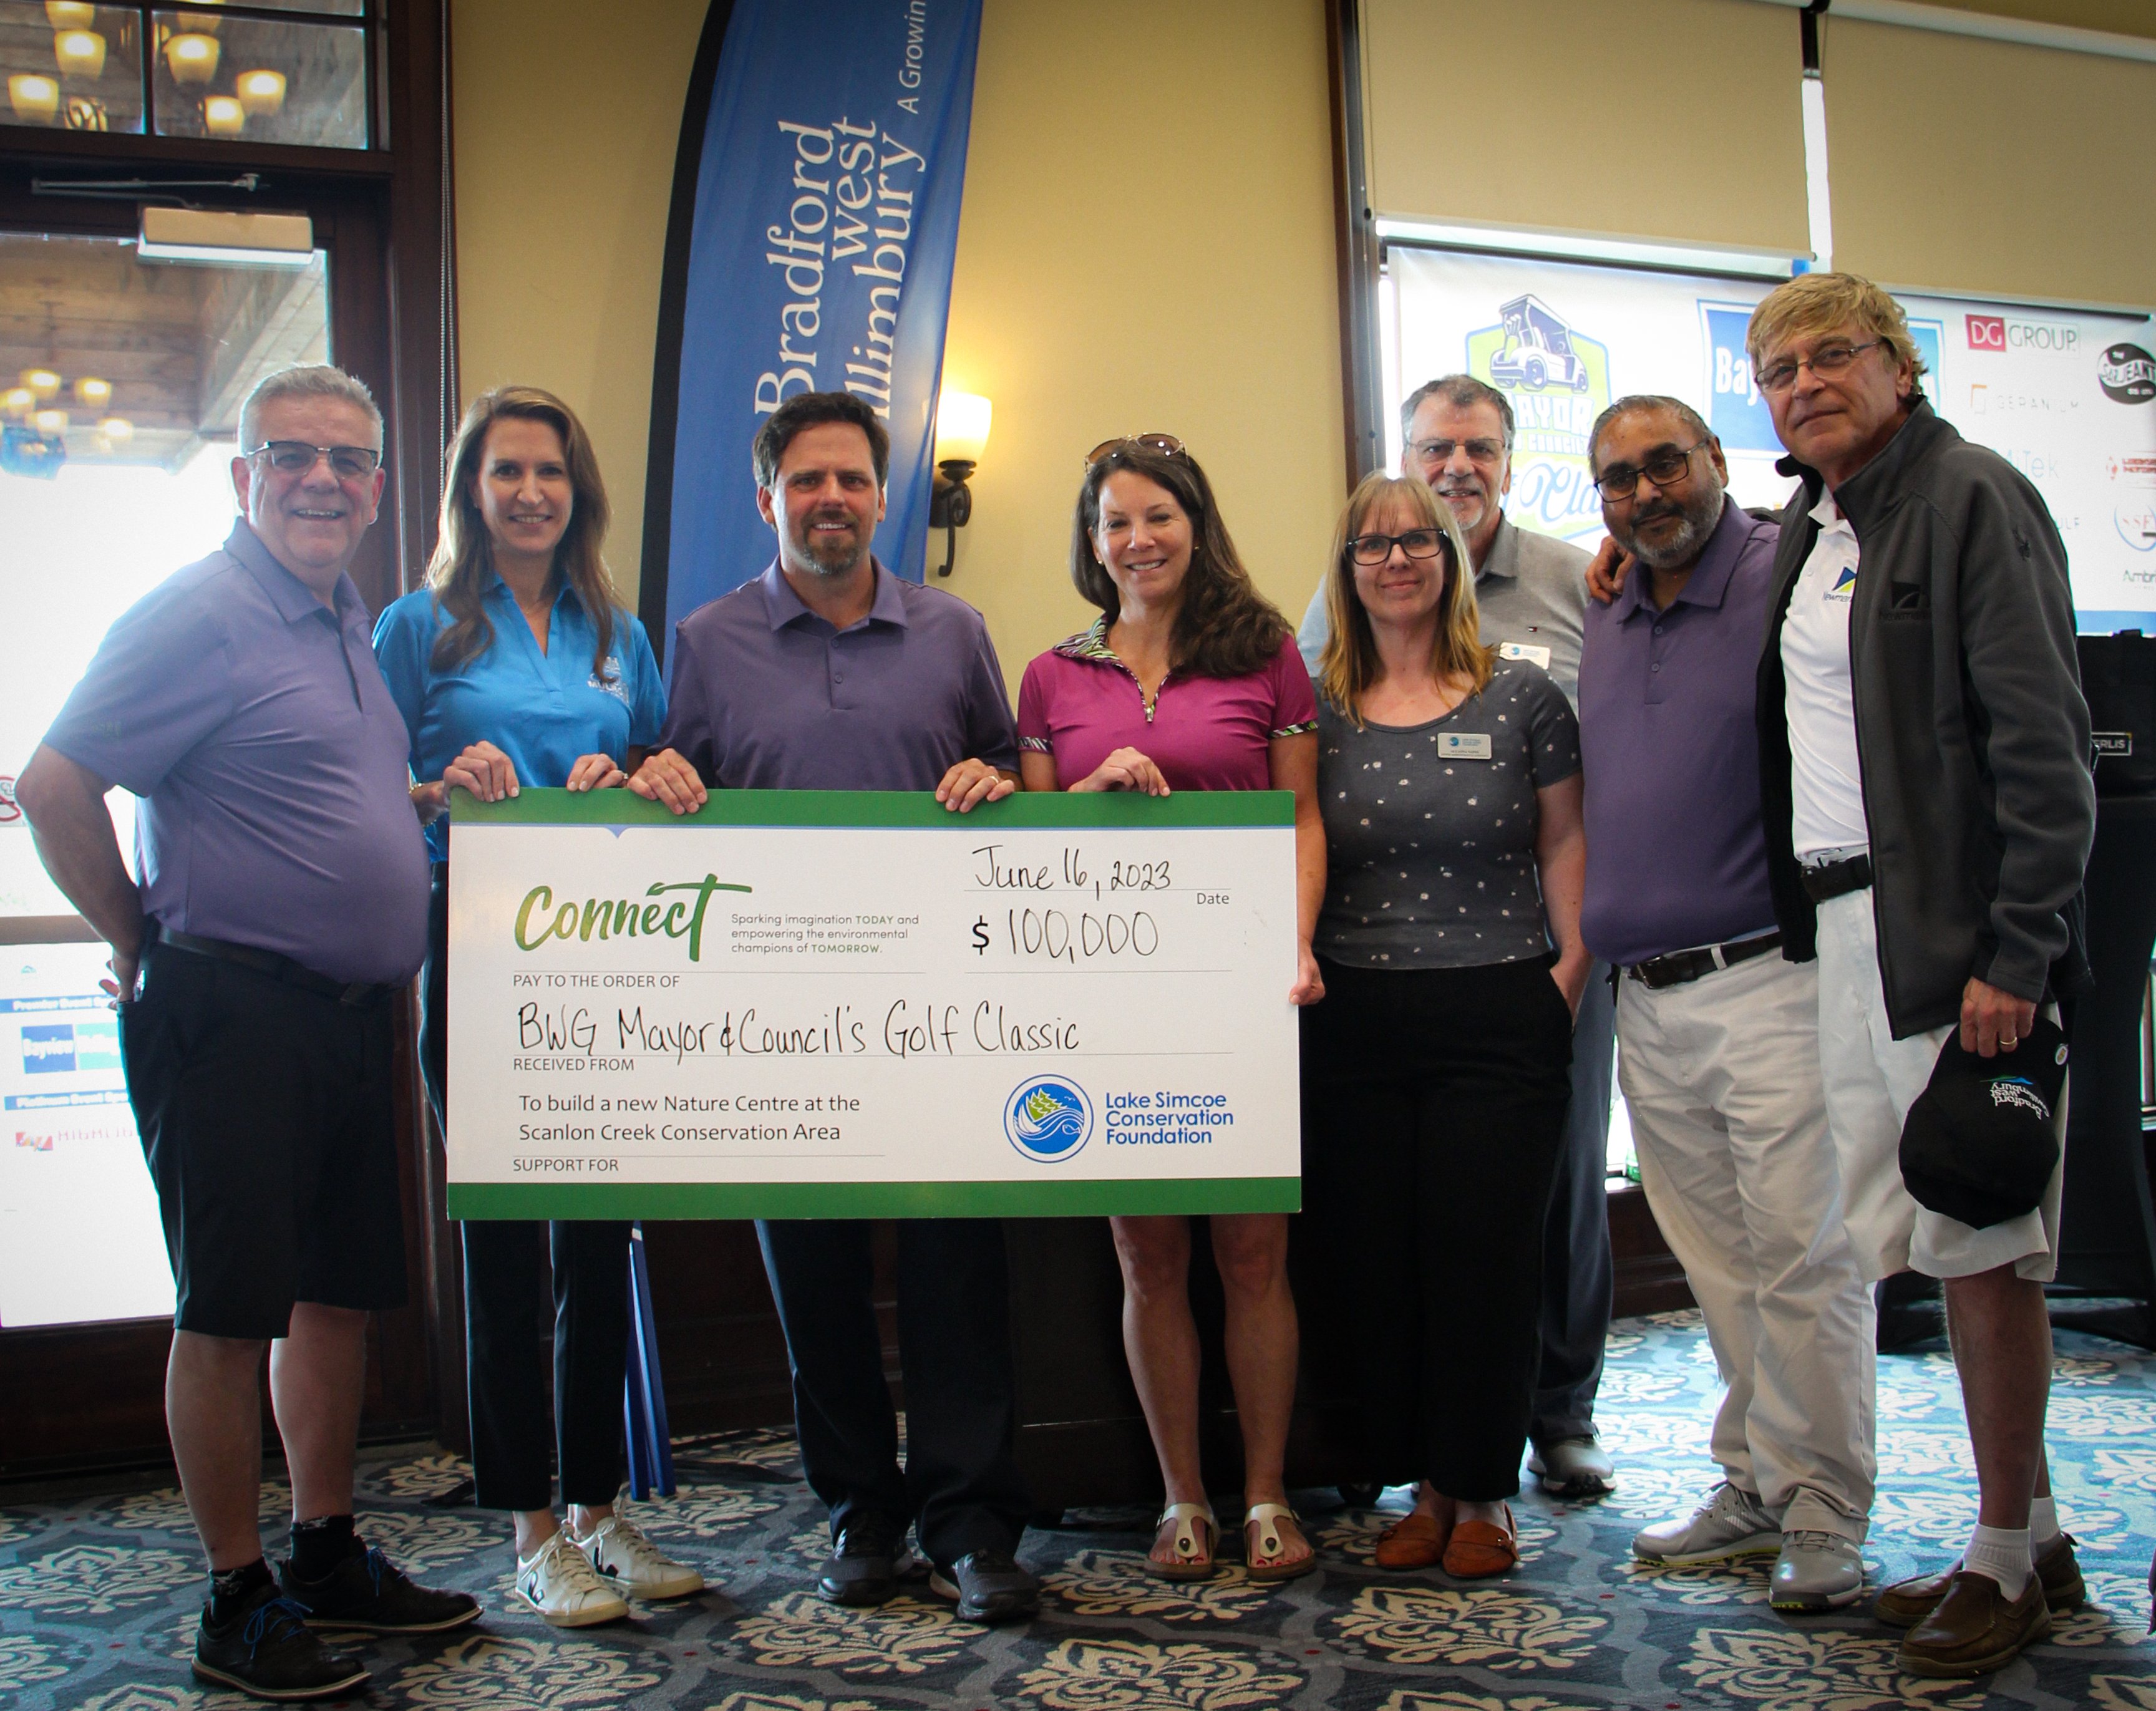 BWG Council members and MPP Caroline Mulroney presenting cheque of $100,000 to the Lake Simcoe Conservation Foundation for their Connect campaign